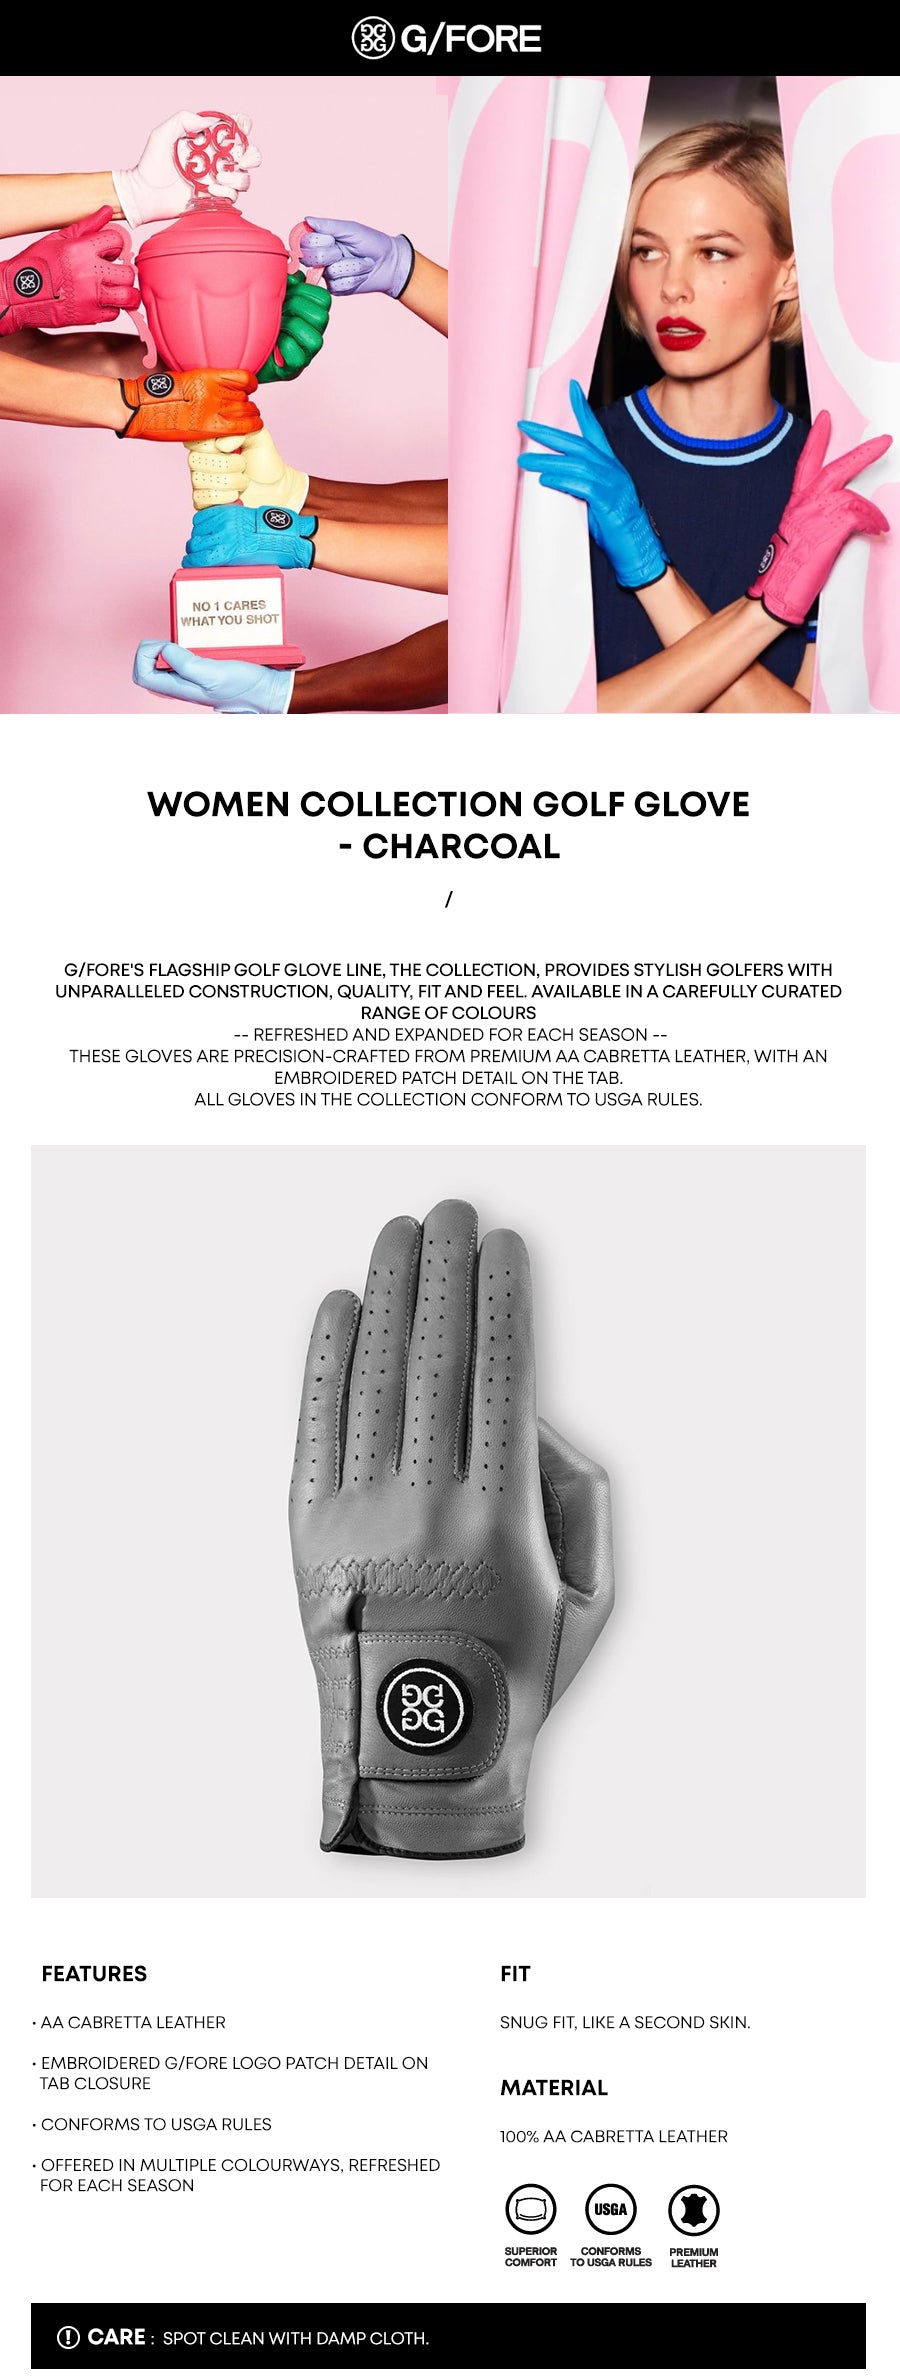 gfore-women-collection-golf-glove-charcoal